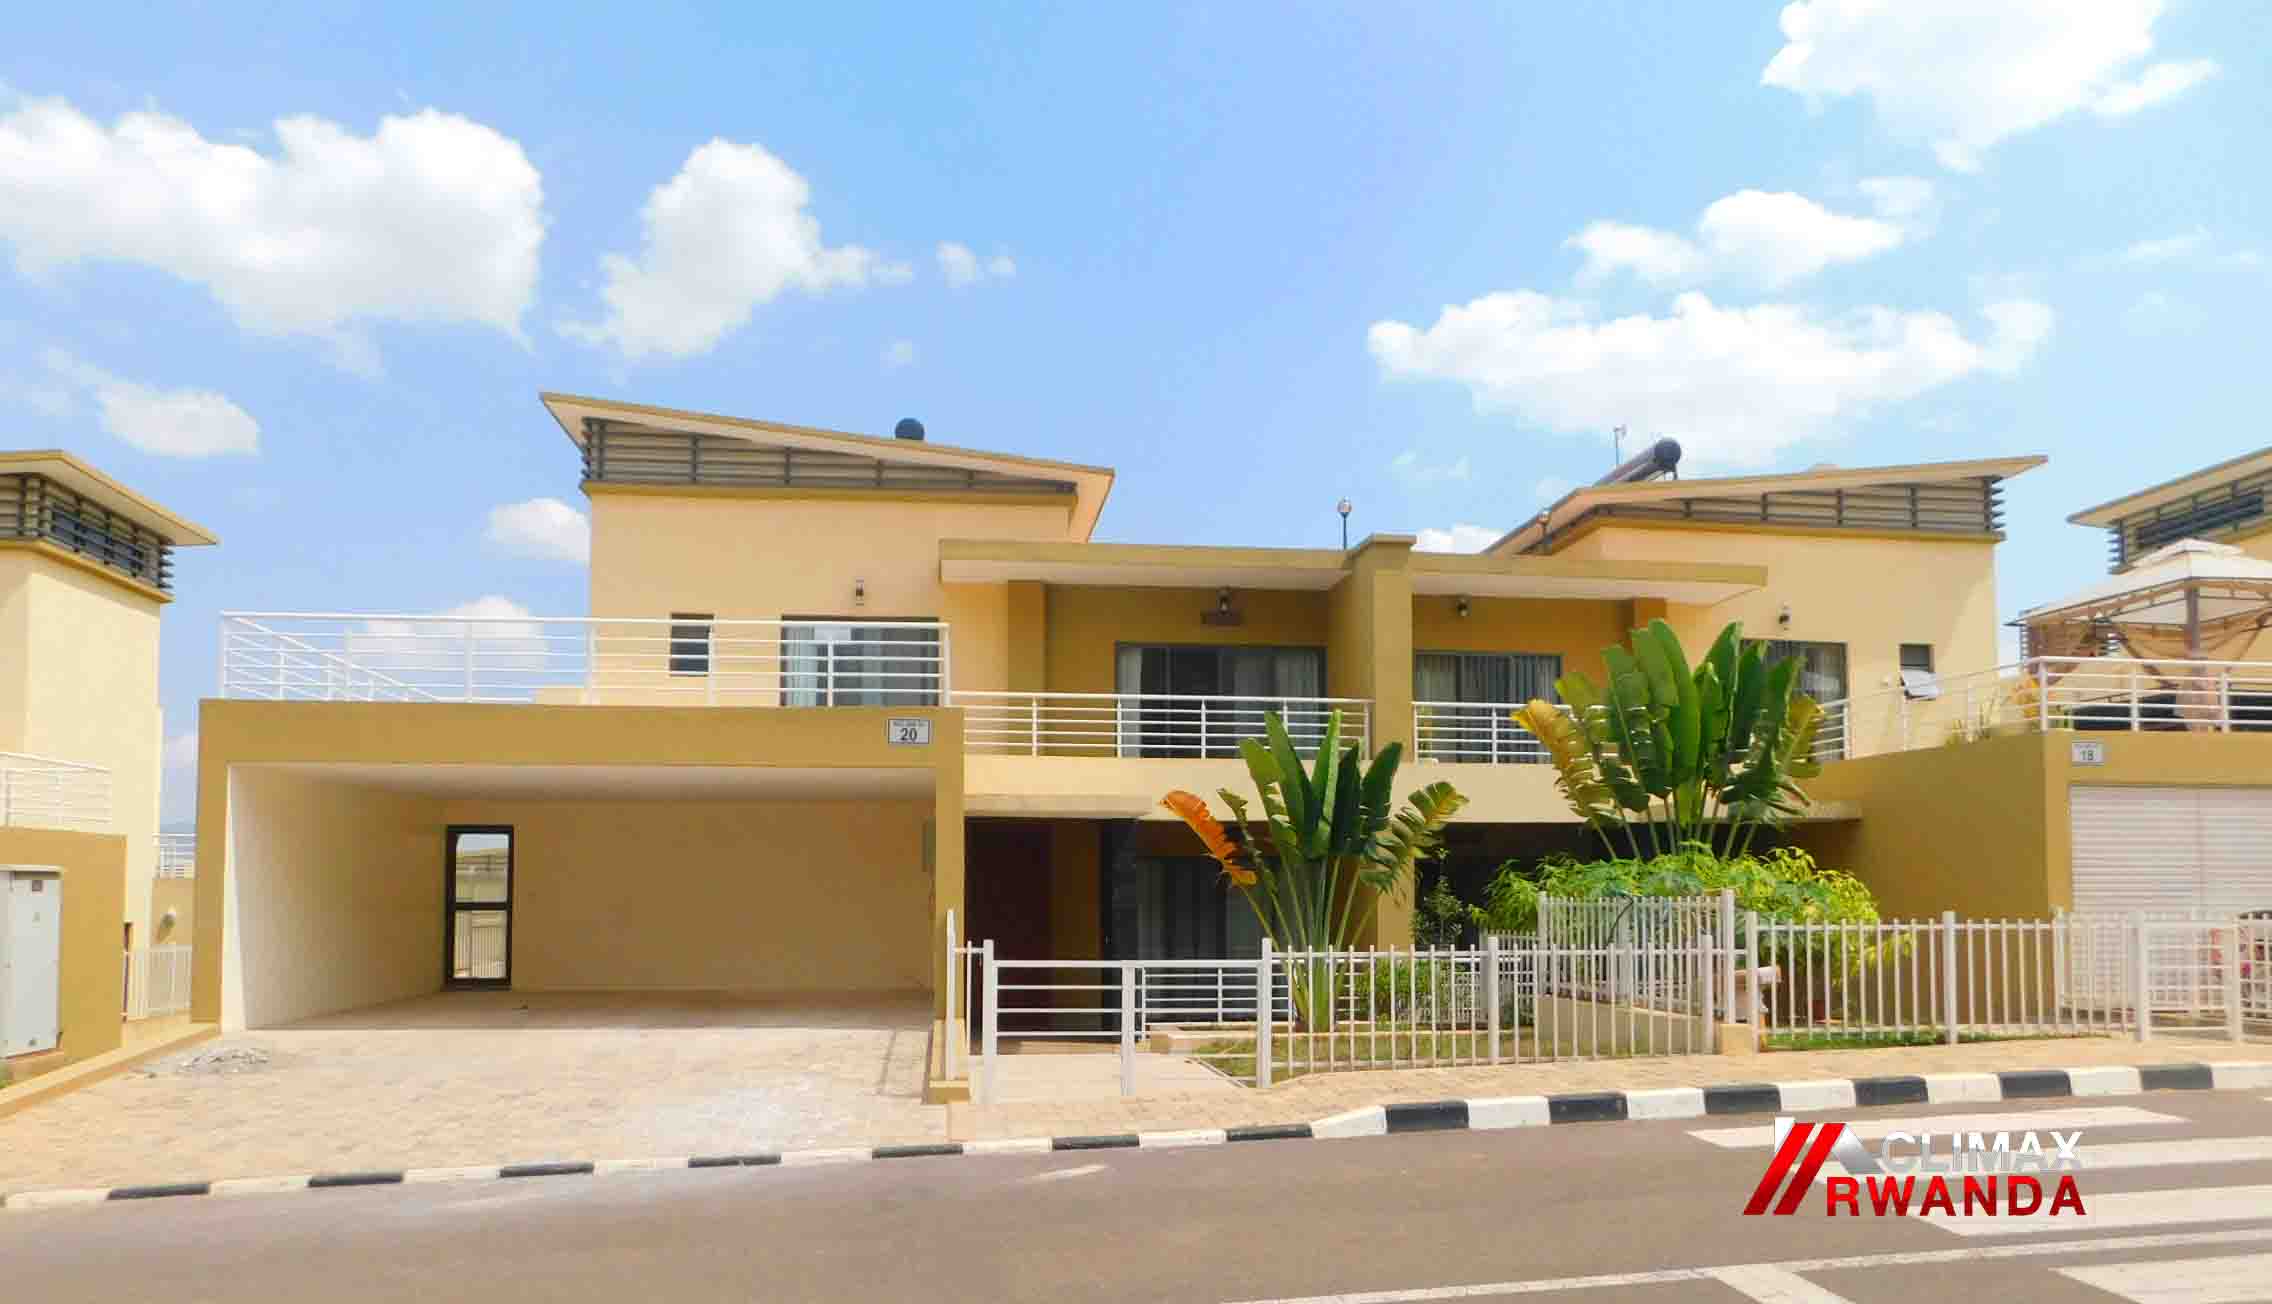 Beautiful Vision city duplex for rent